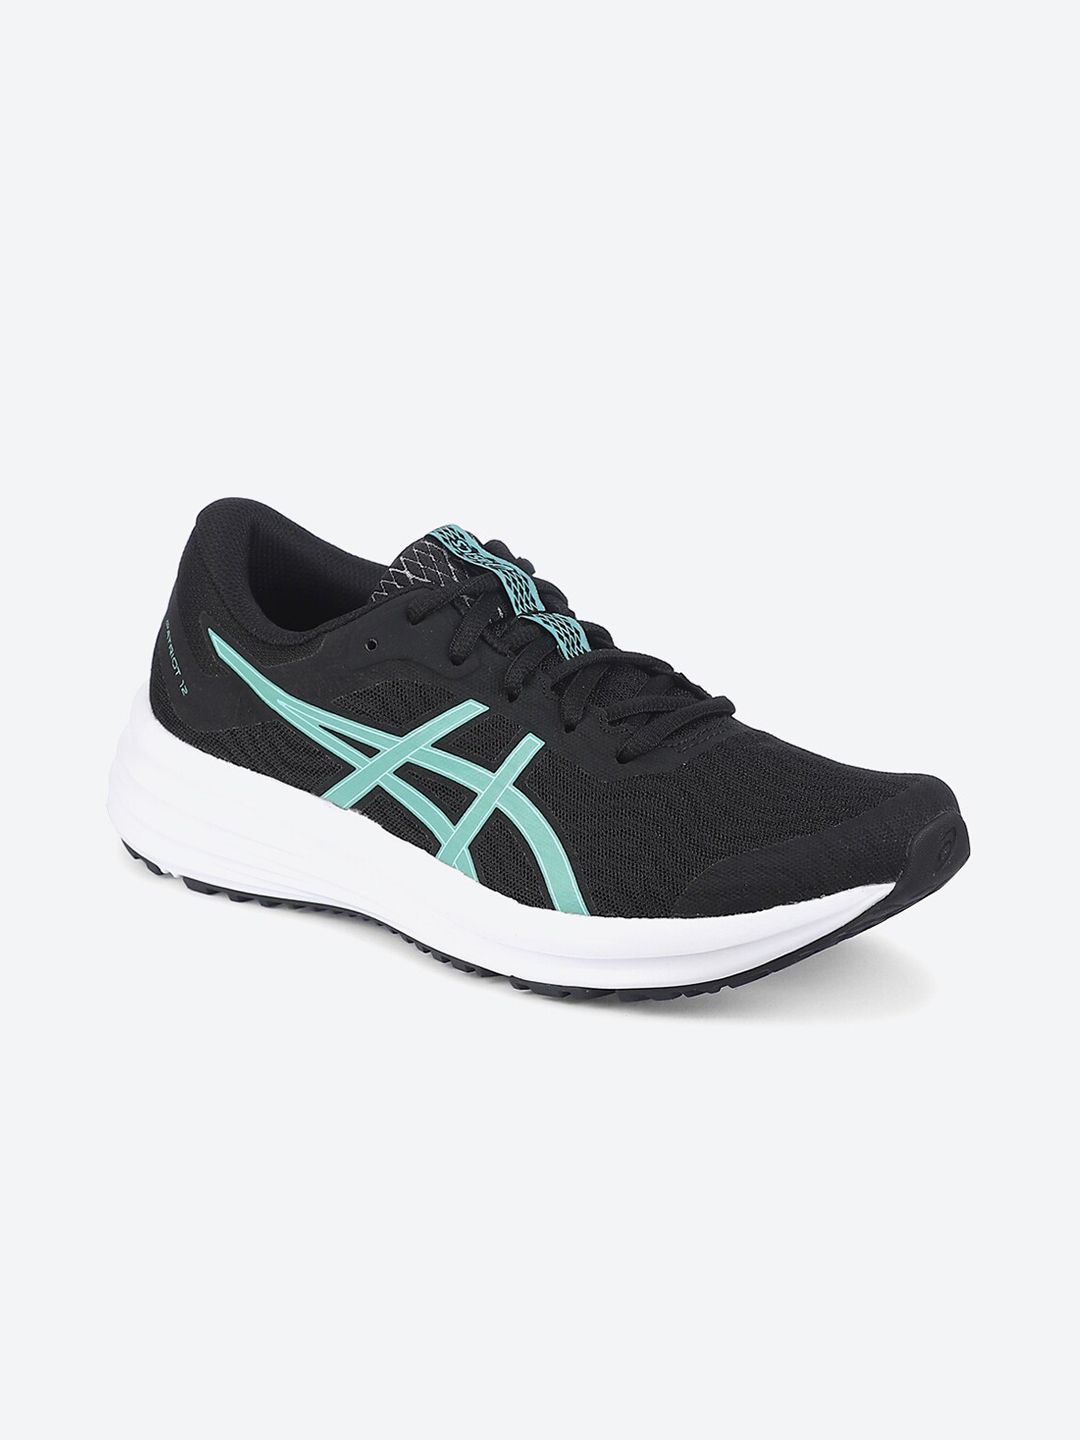 ASICS Women Black Patriot 12 Sports Shoes Price in India